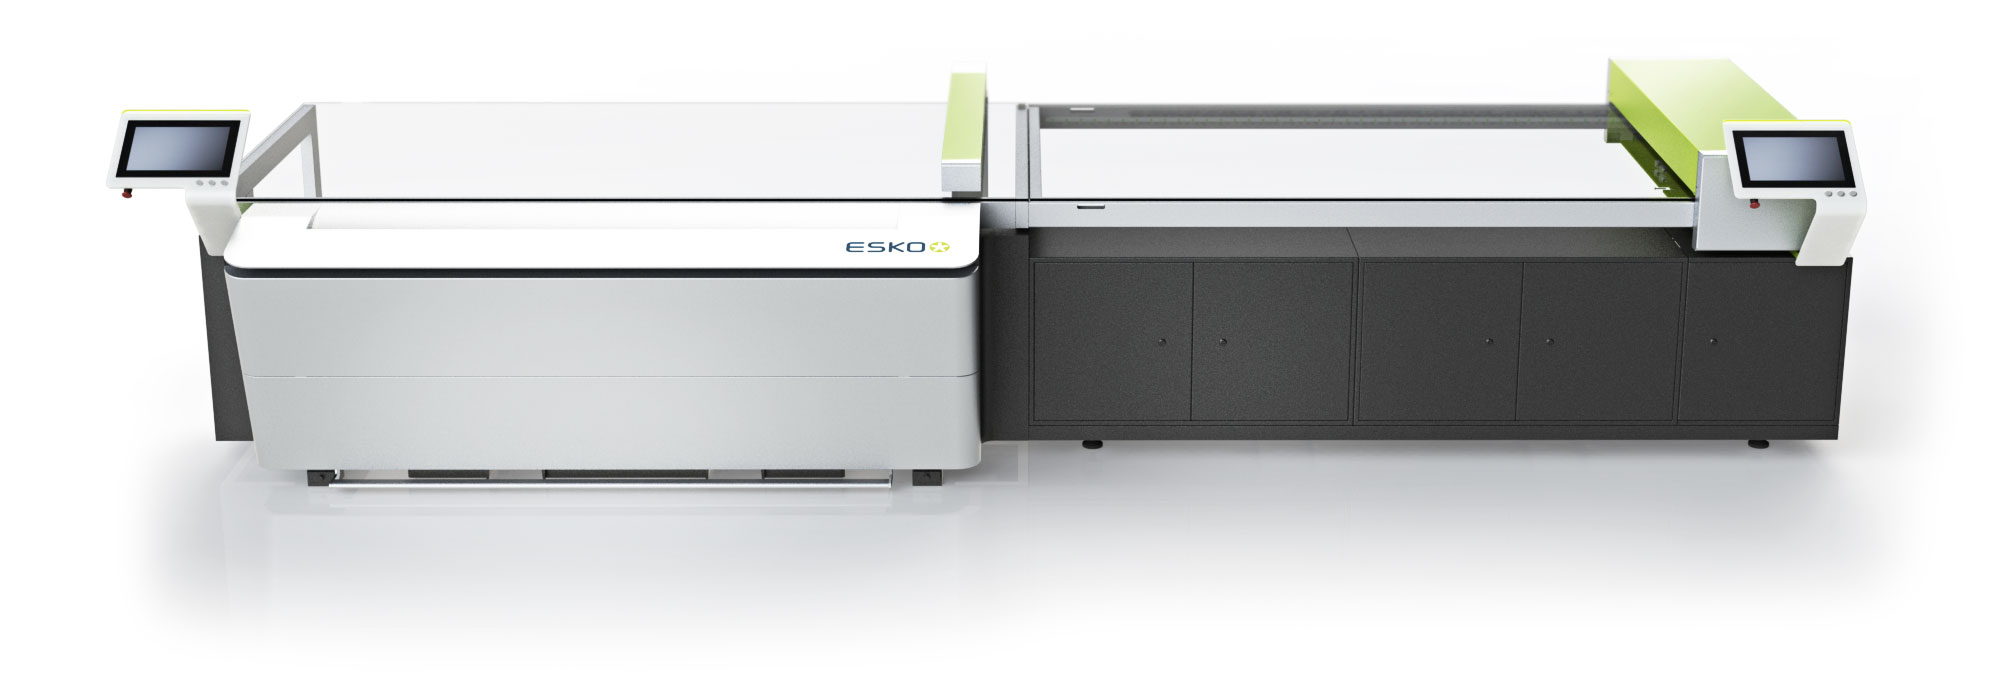 Superior flexo plate making for perfect packaging printing with the Esko CDI Crystal 5080 XPS